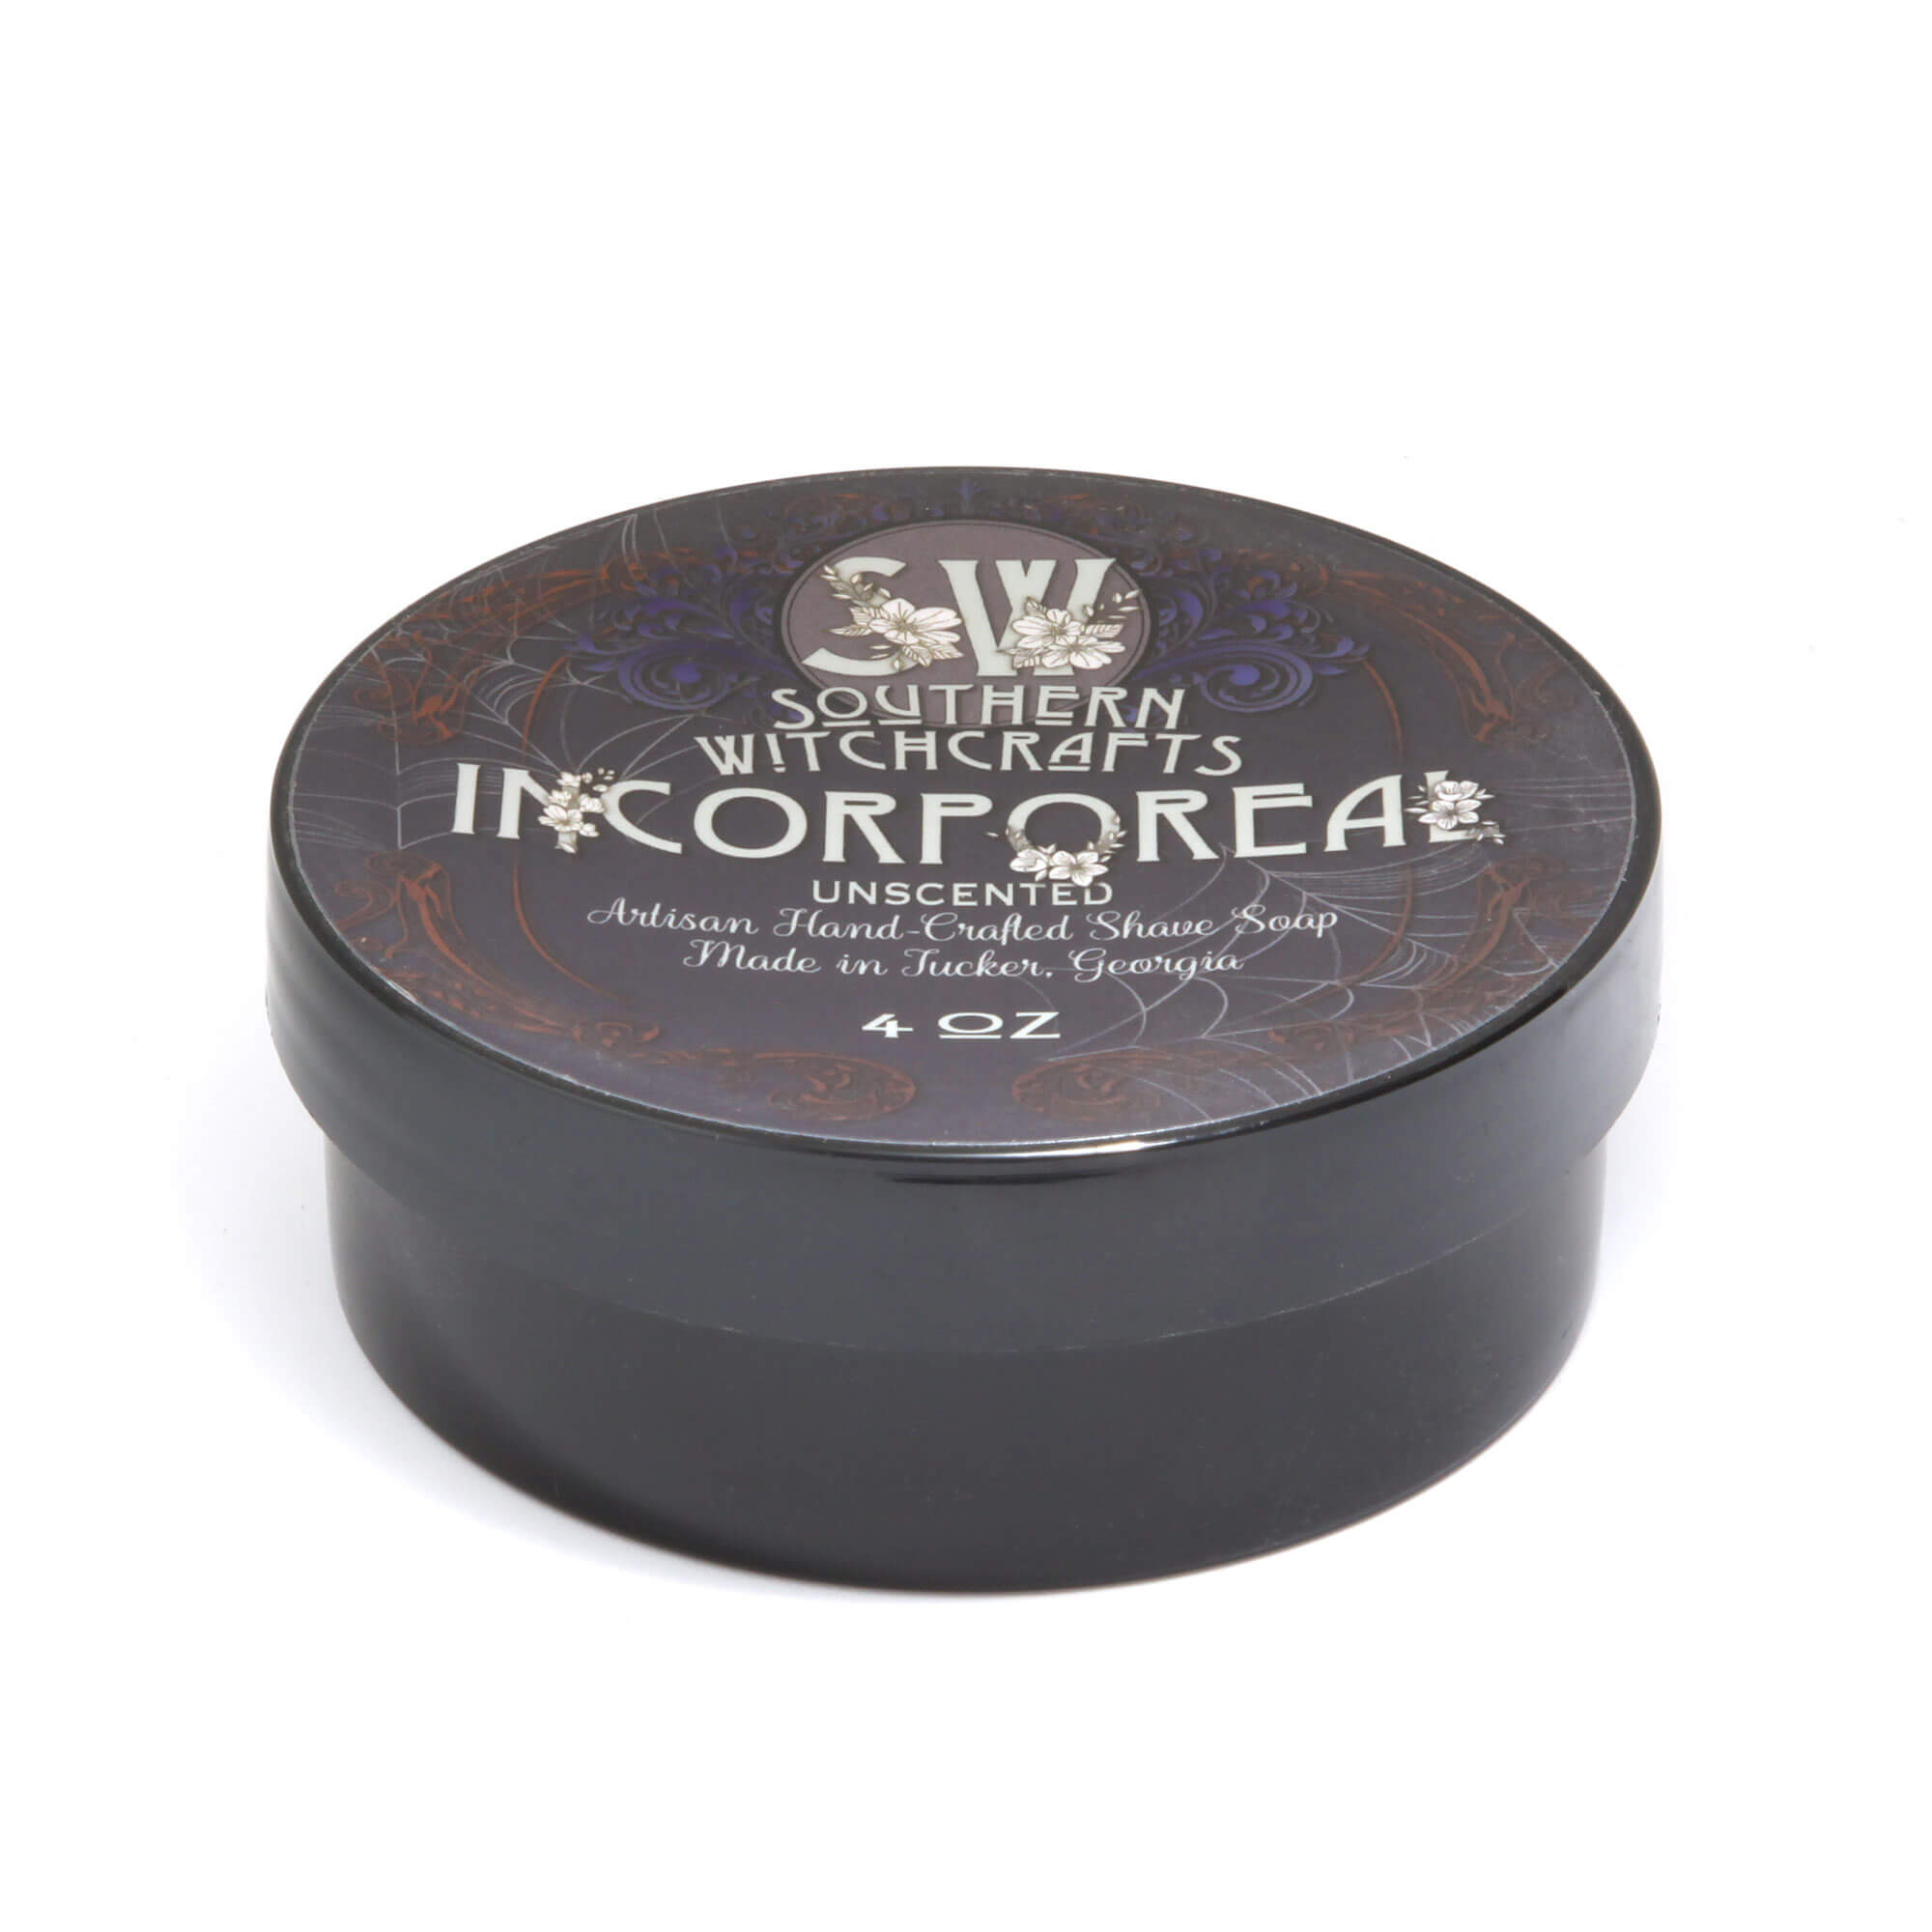 Southern Witchcrafts Incorporeal Shaving Soap